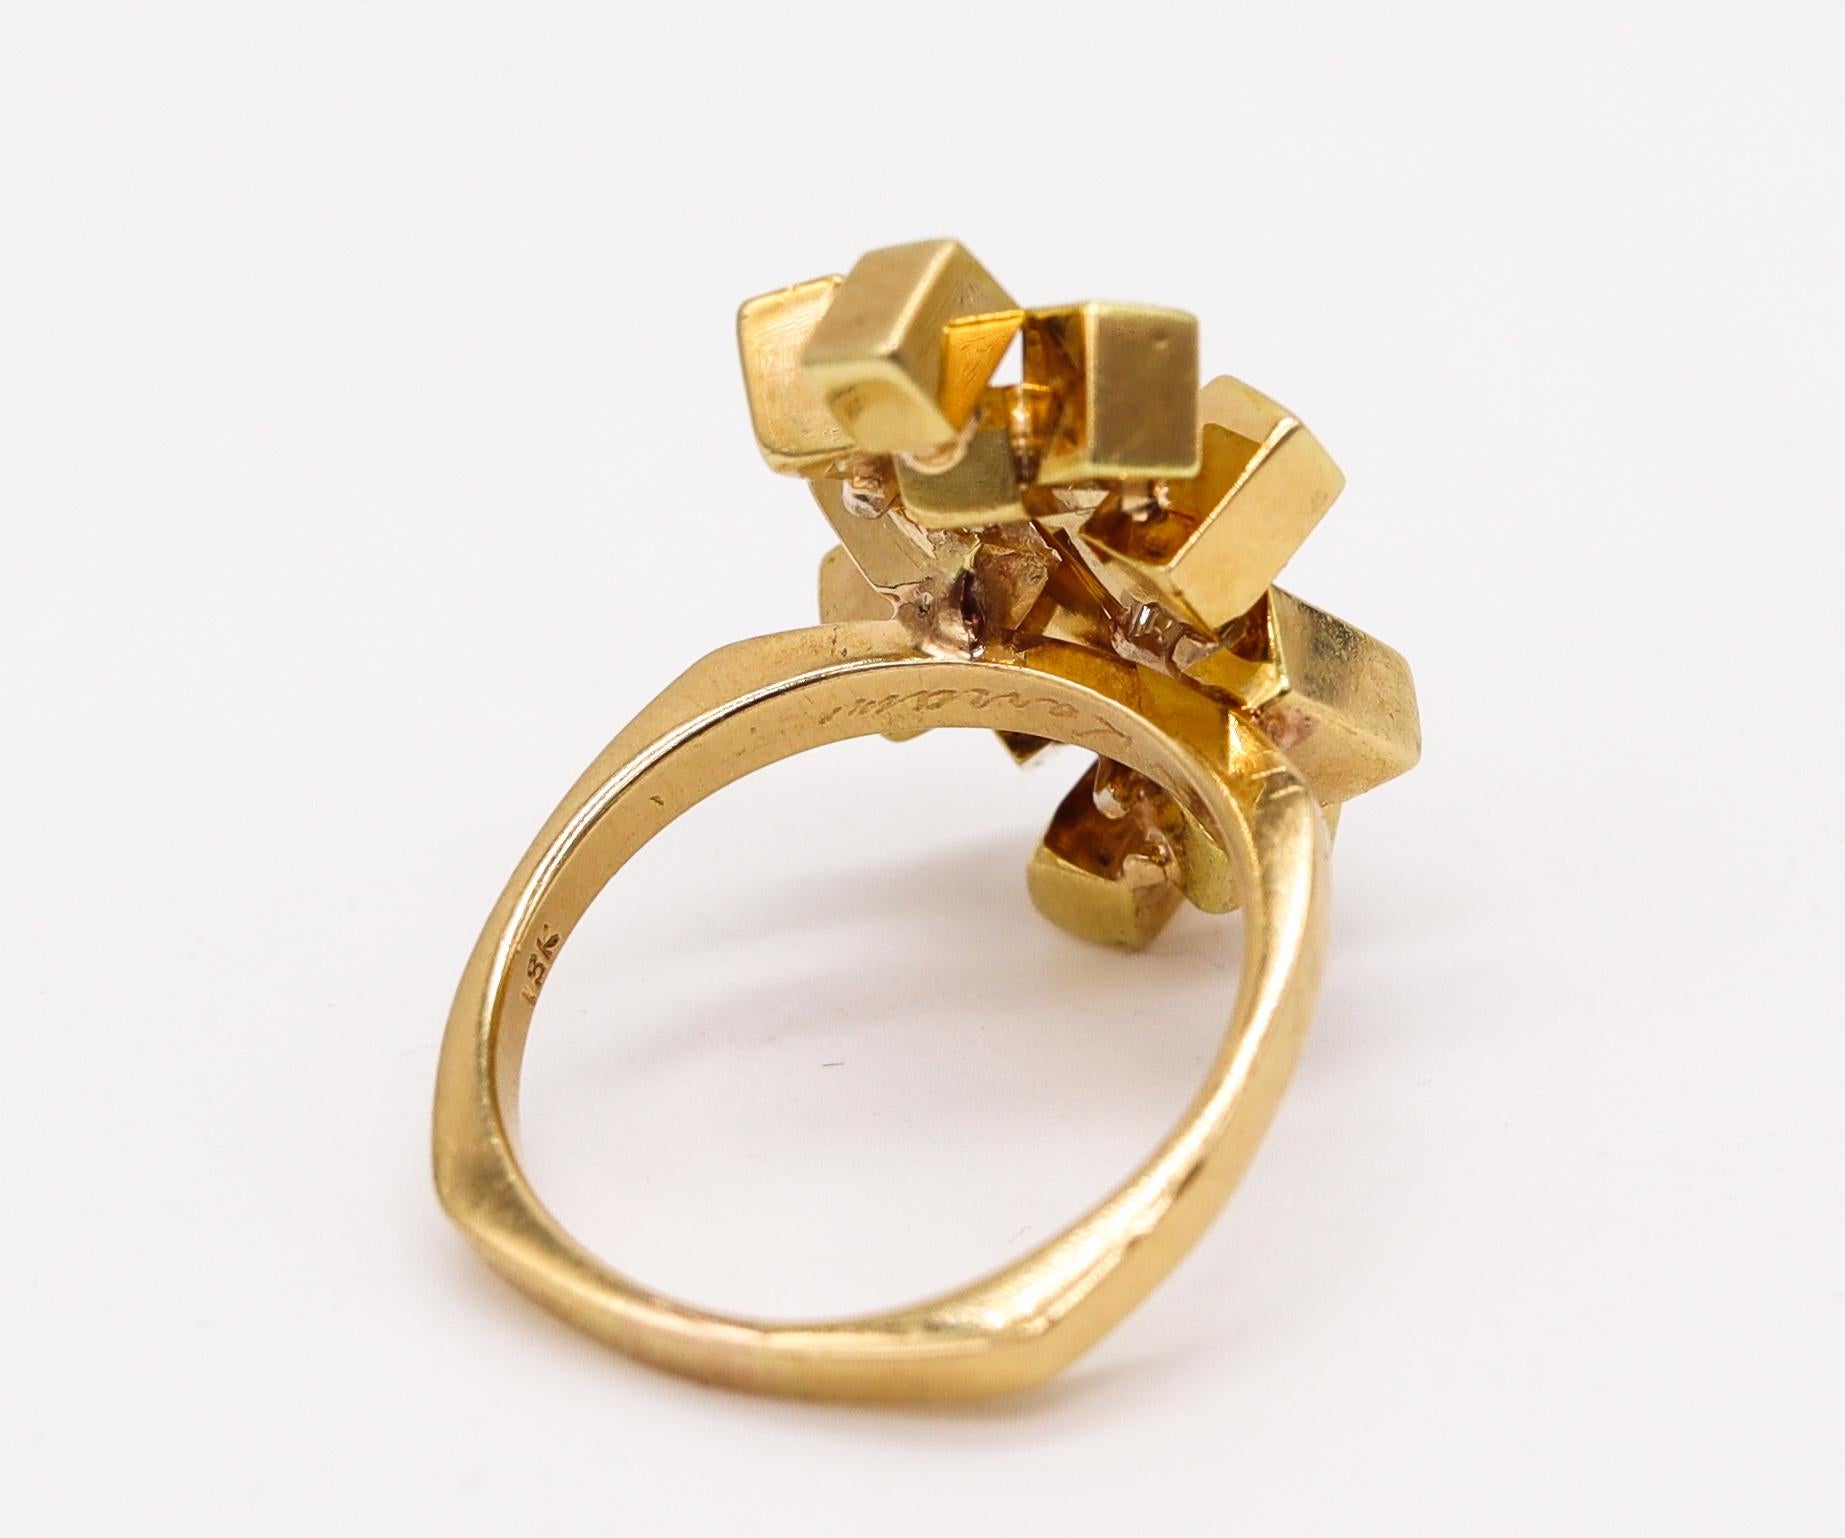 Modernist Alfred Karram 1970 Brutalist Geometric Cubic Ring in 18 Kt Gold with Diamonds